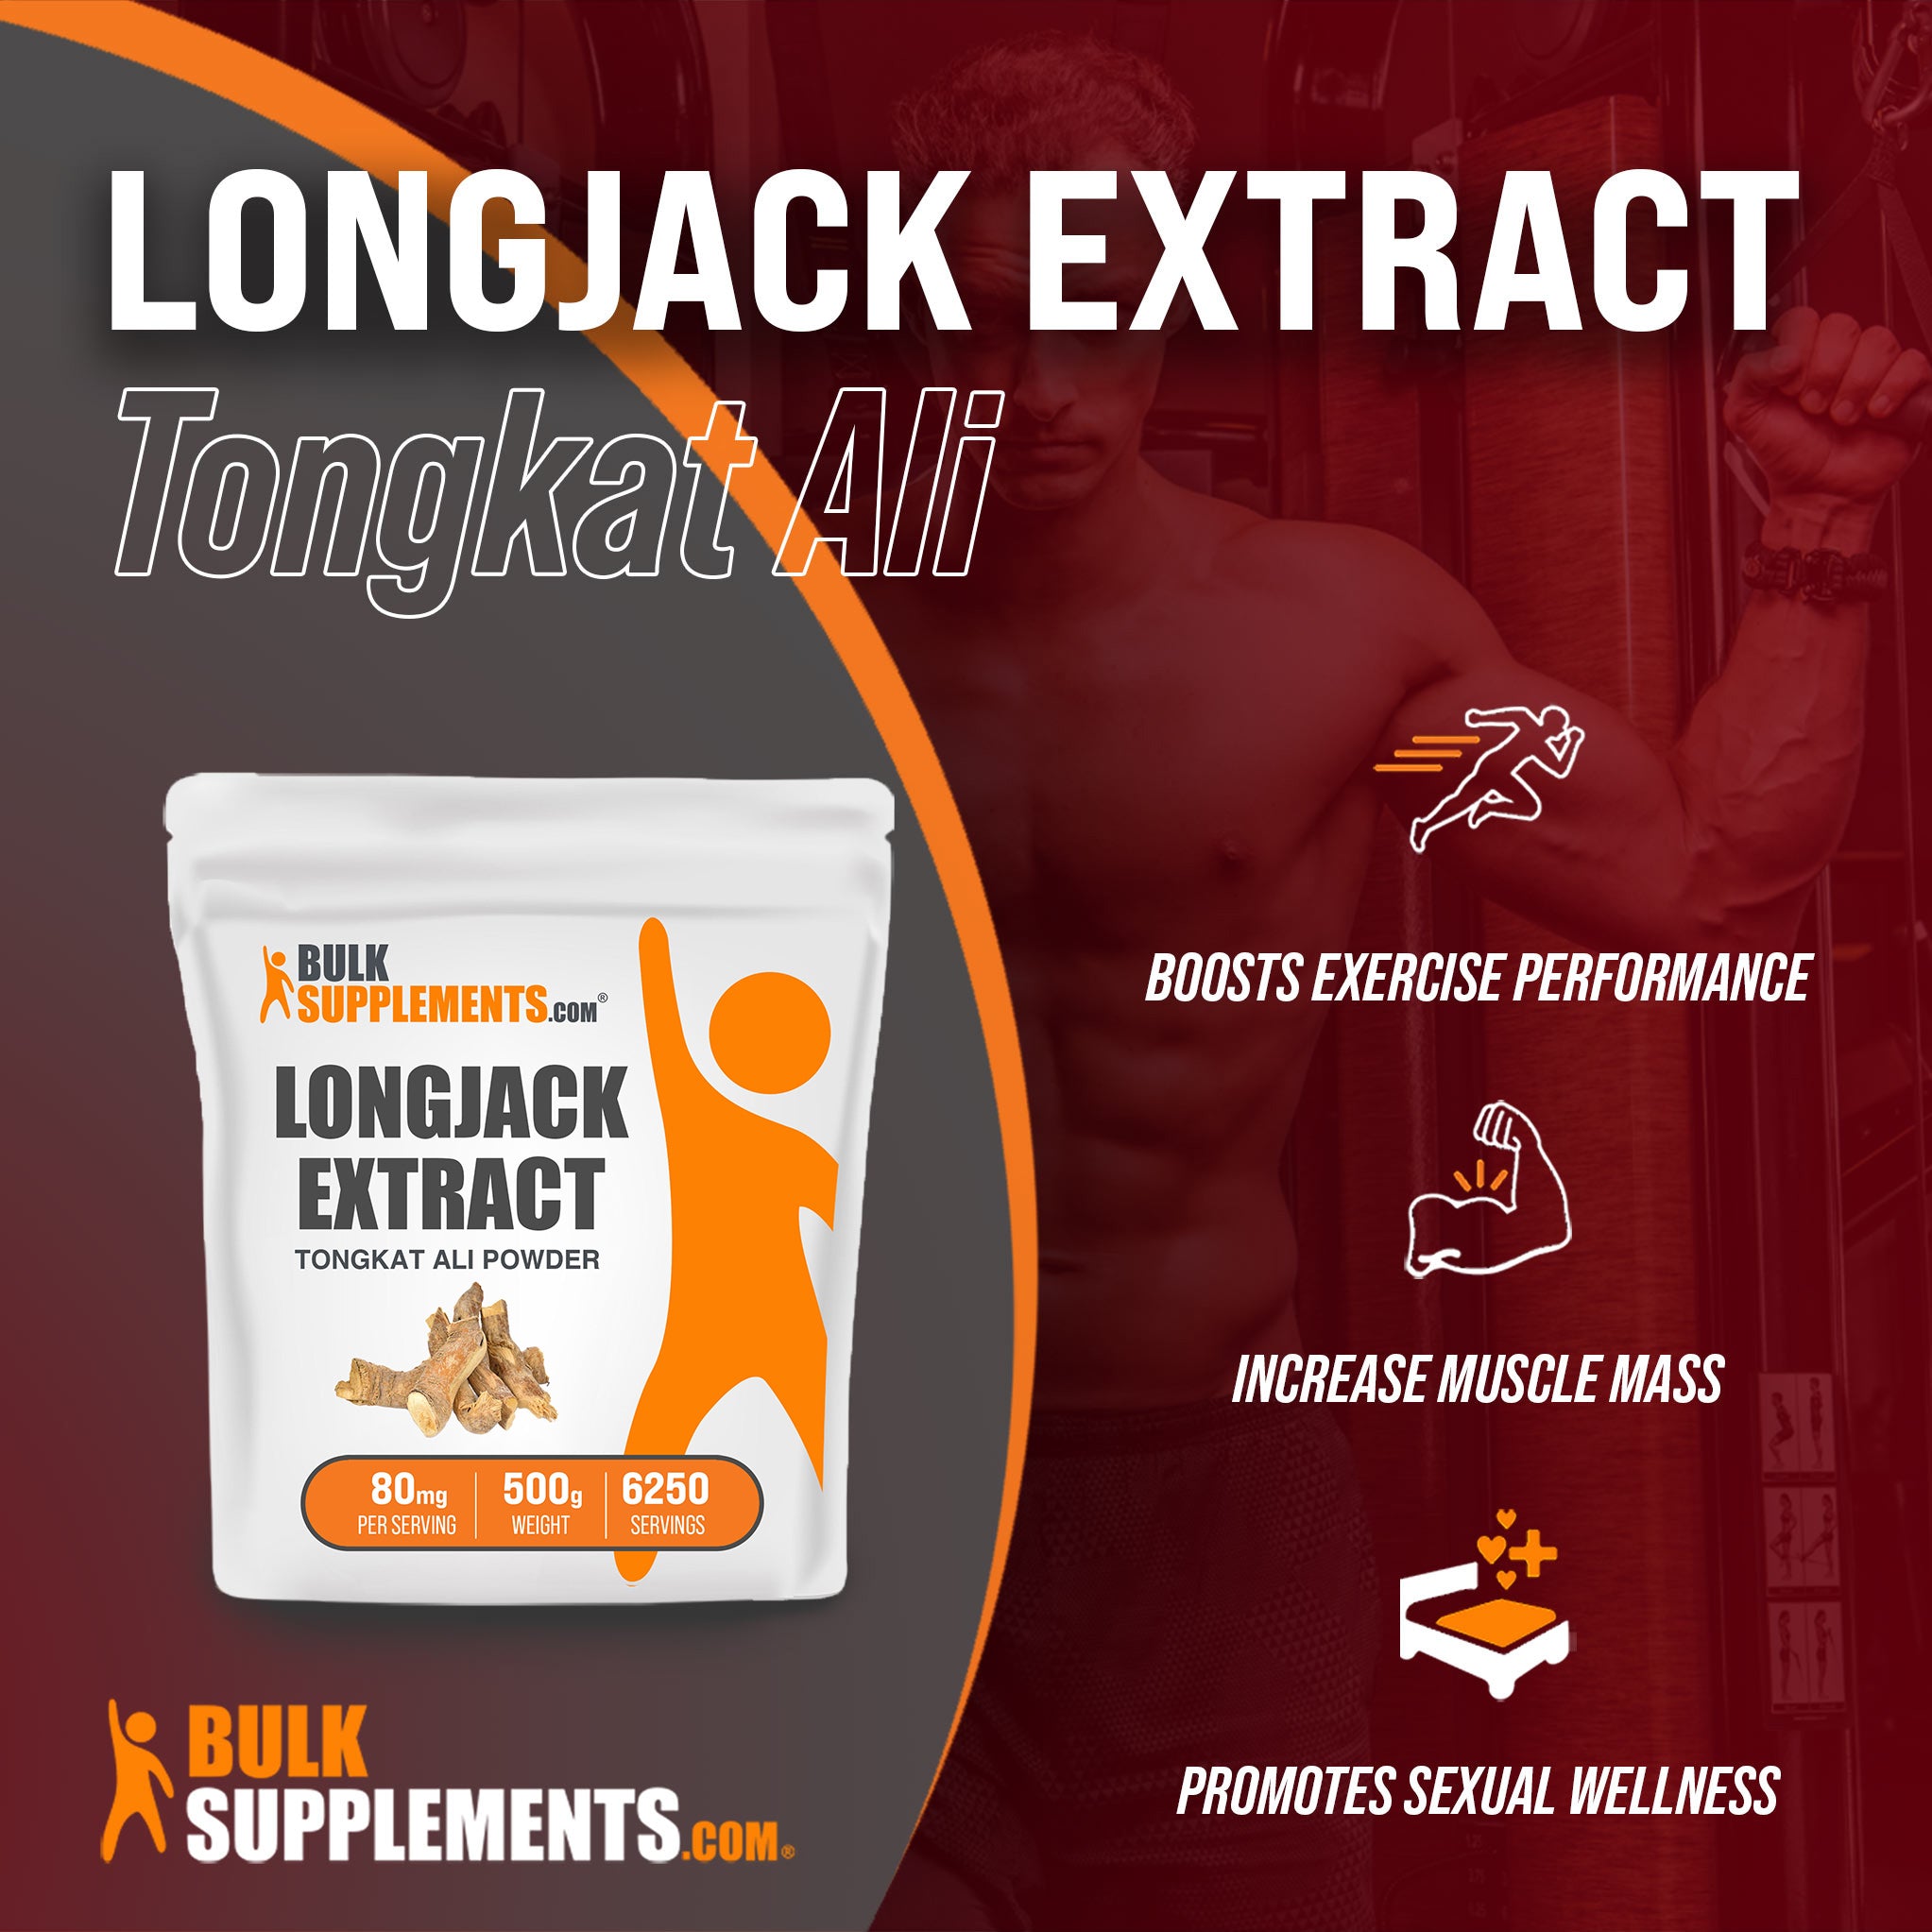 Benefits of Longjack Extract Tongkat Ali: boosts exercise performance, increase muscle mass, promotes sexual wellness